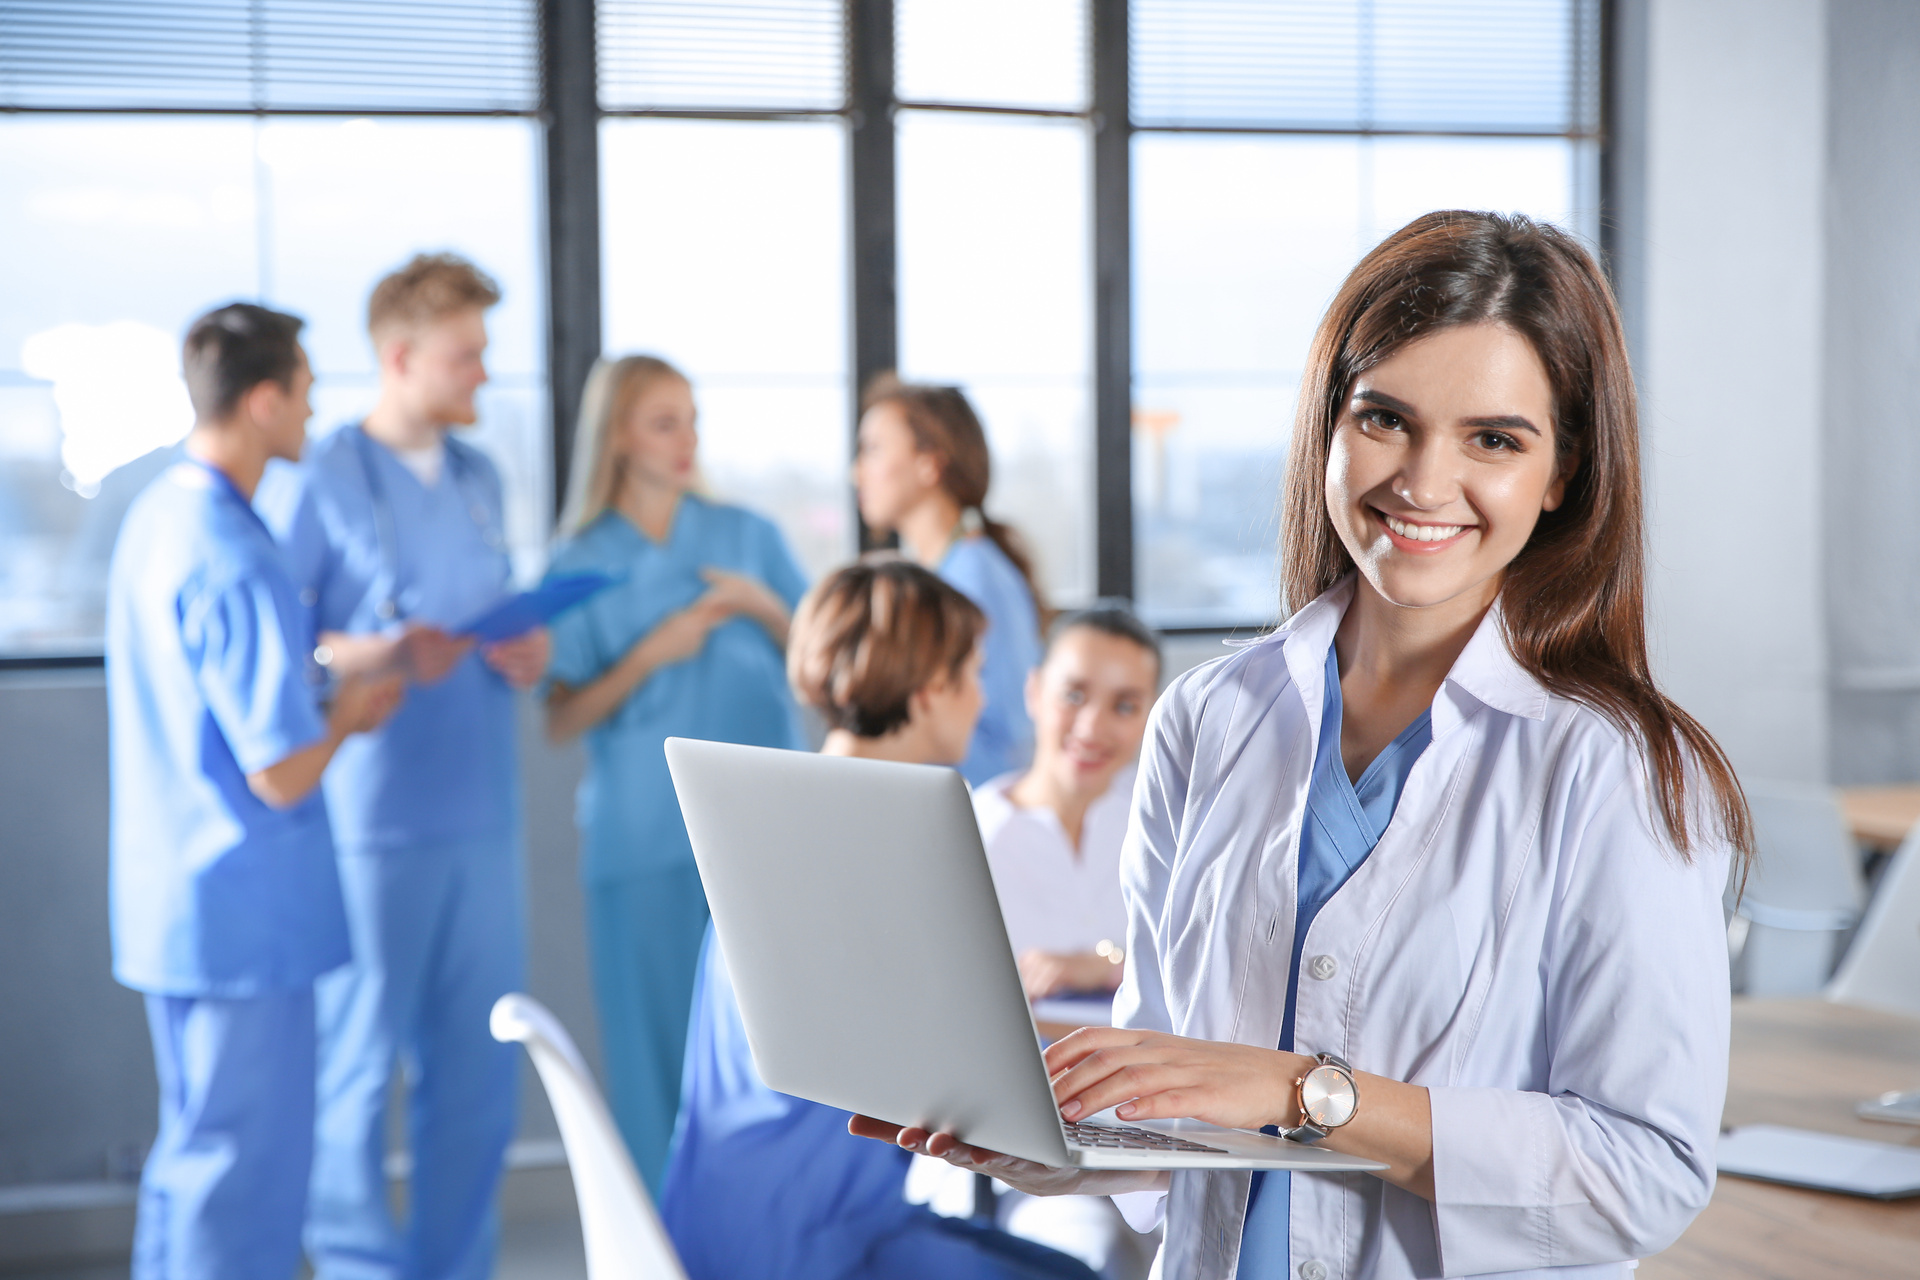 Nursing student holding laptop with group of students chatting in the background